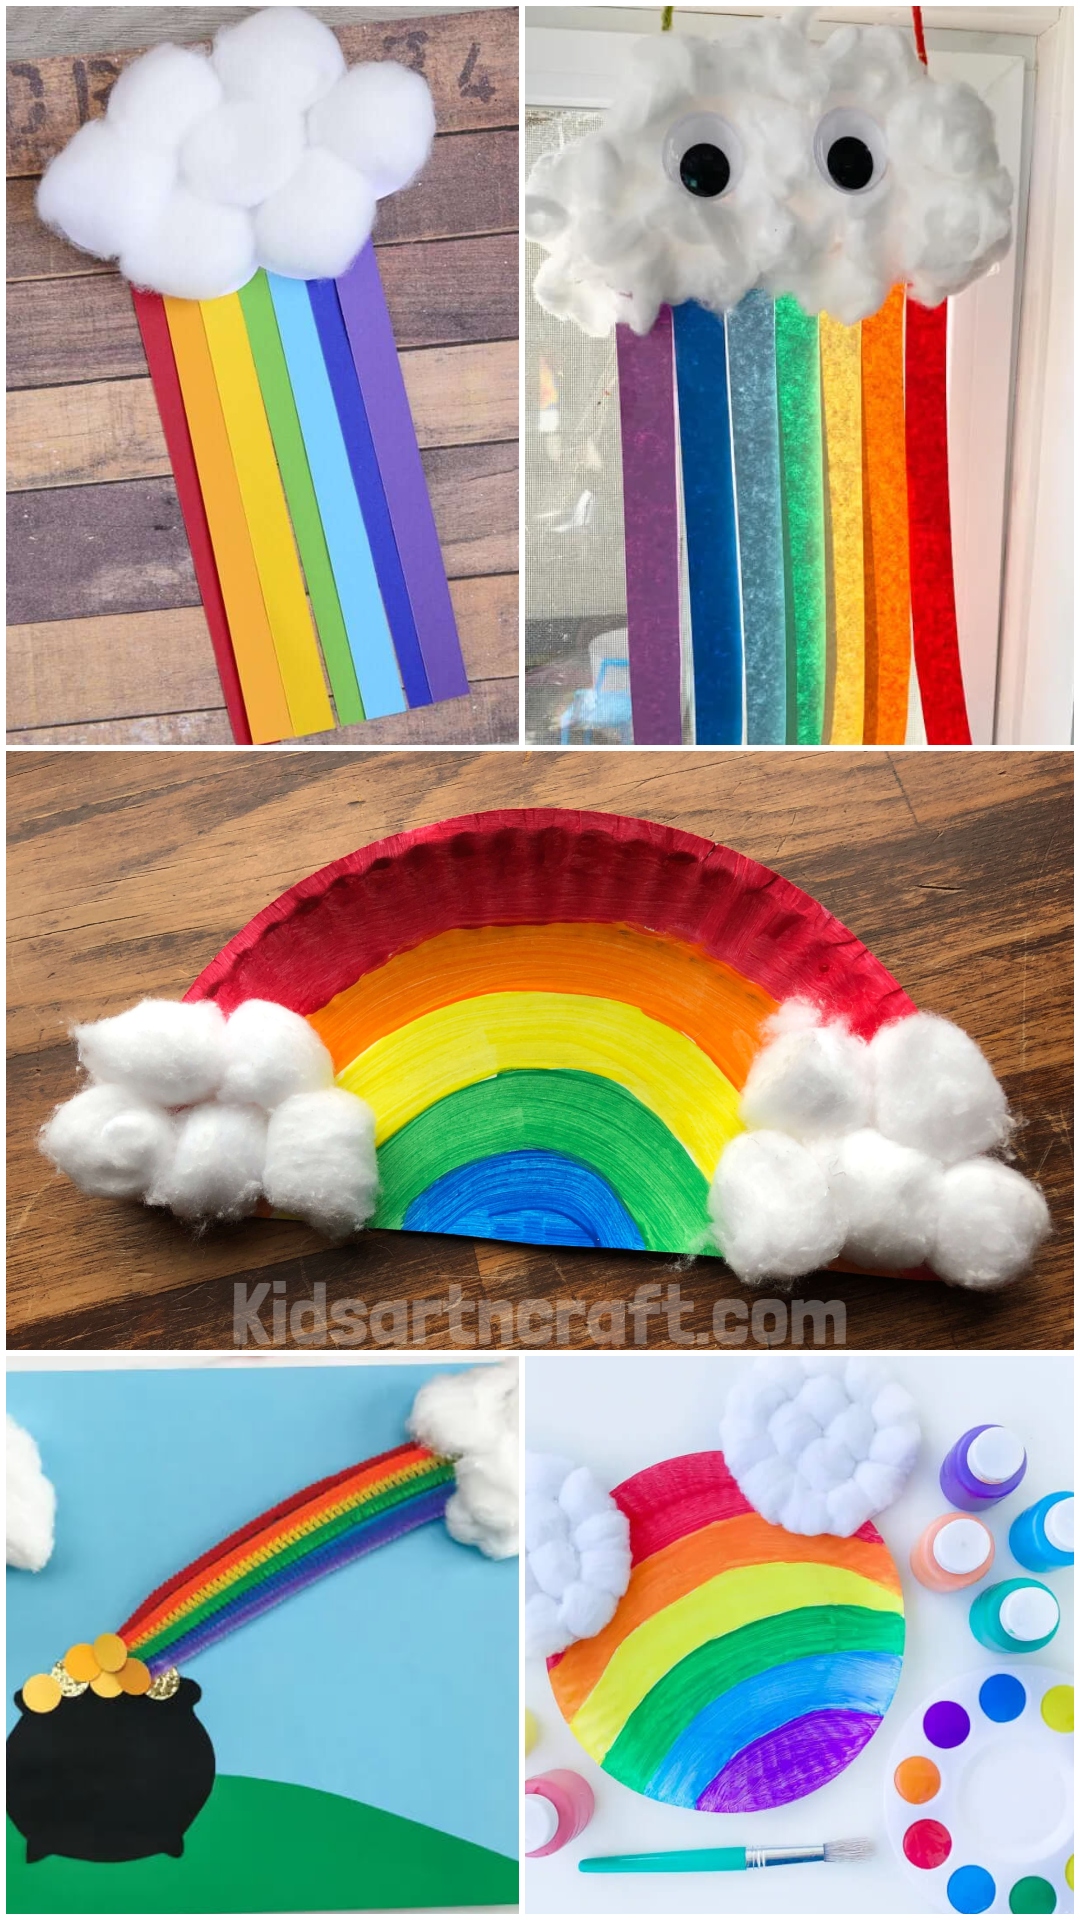  Rainbow Cotton Ball Crafts for Kids